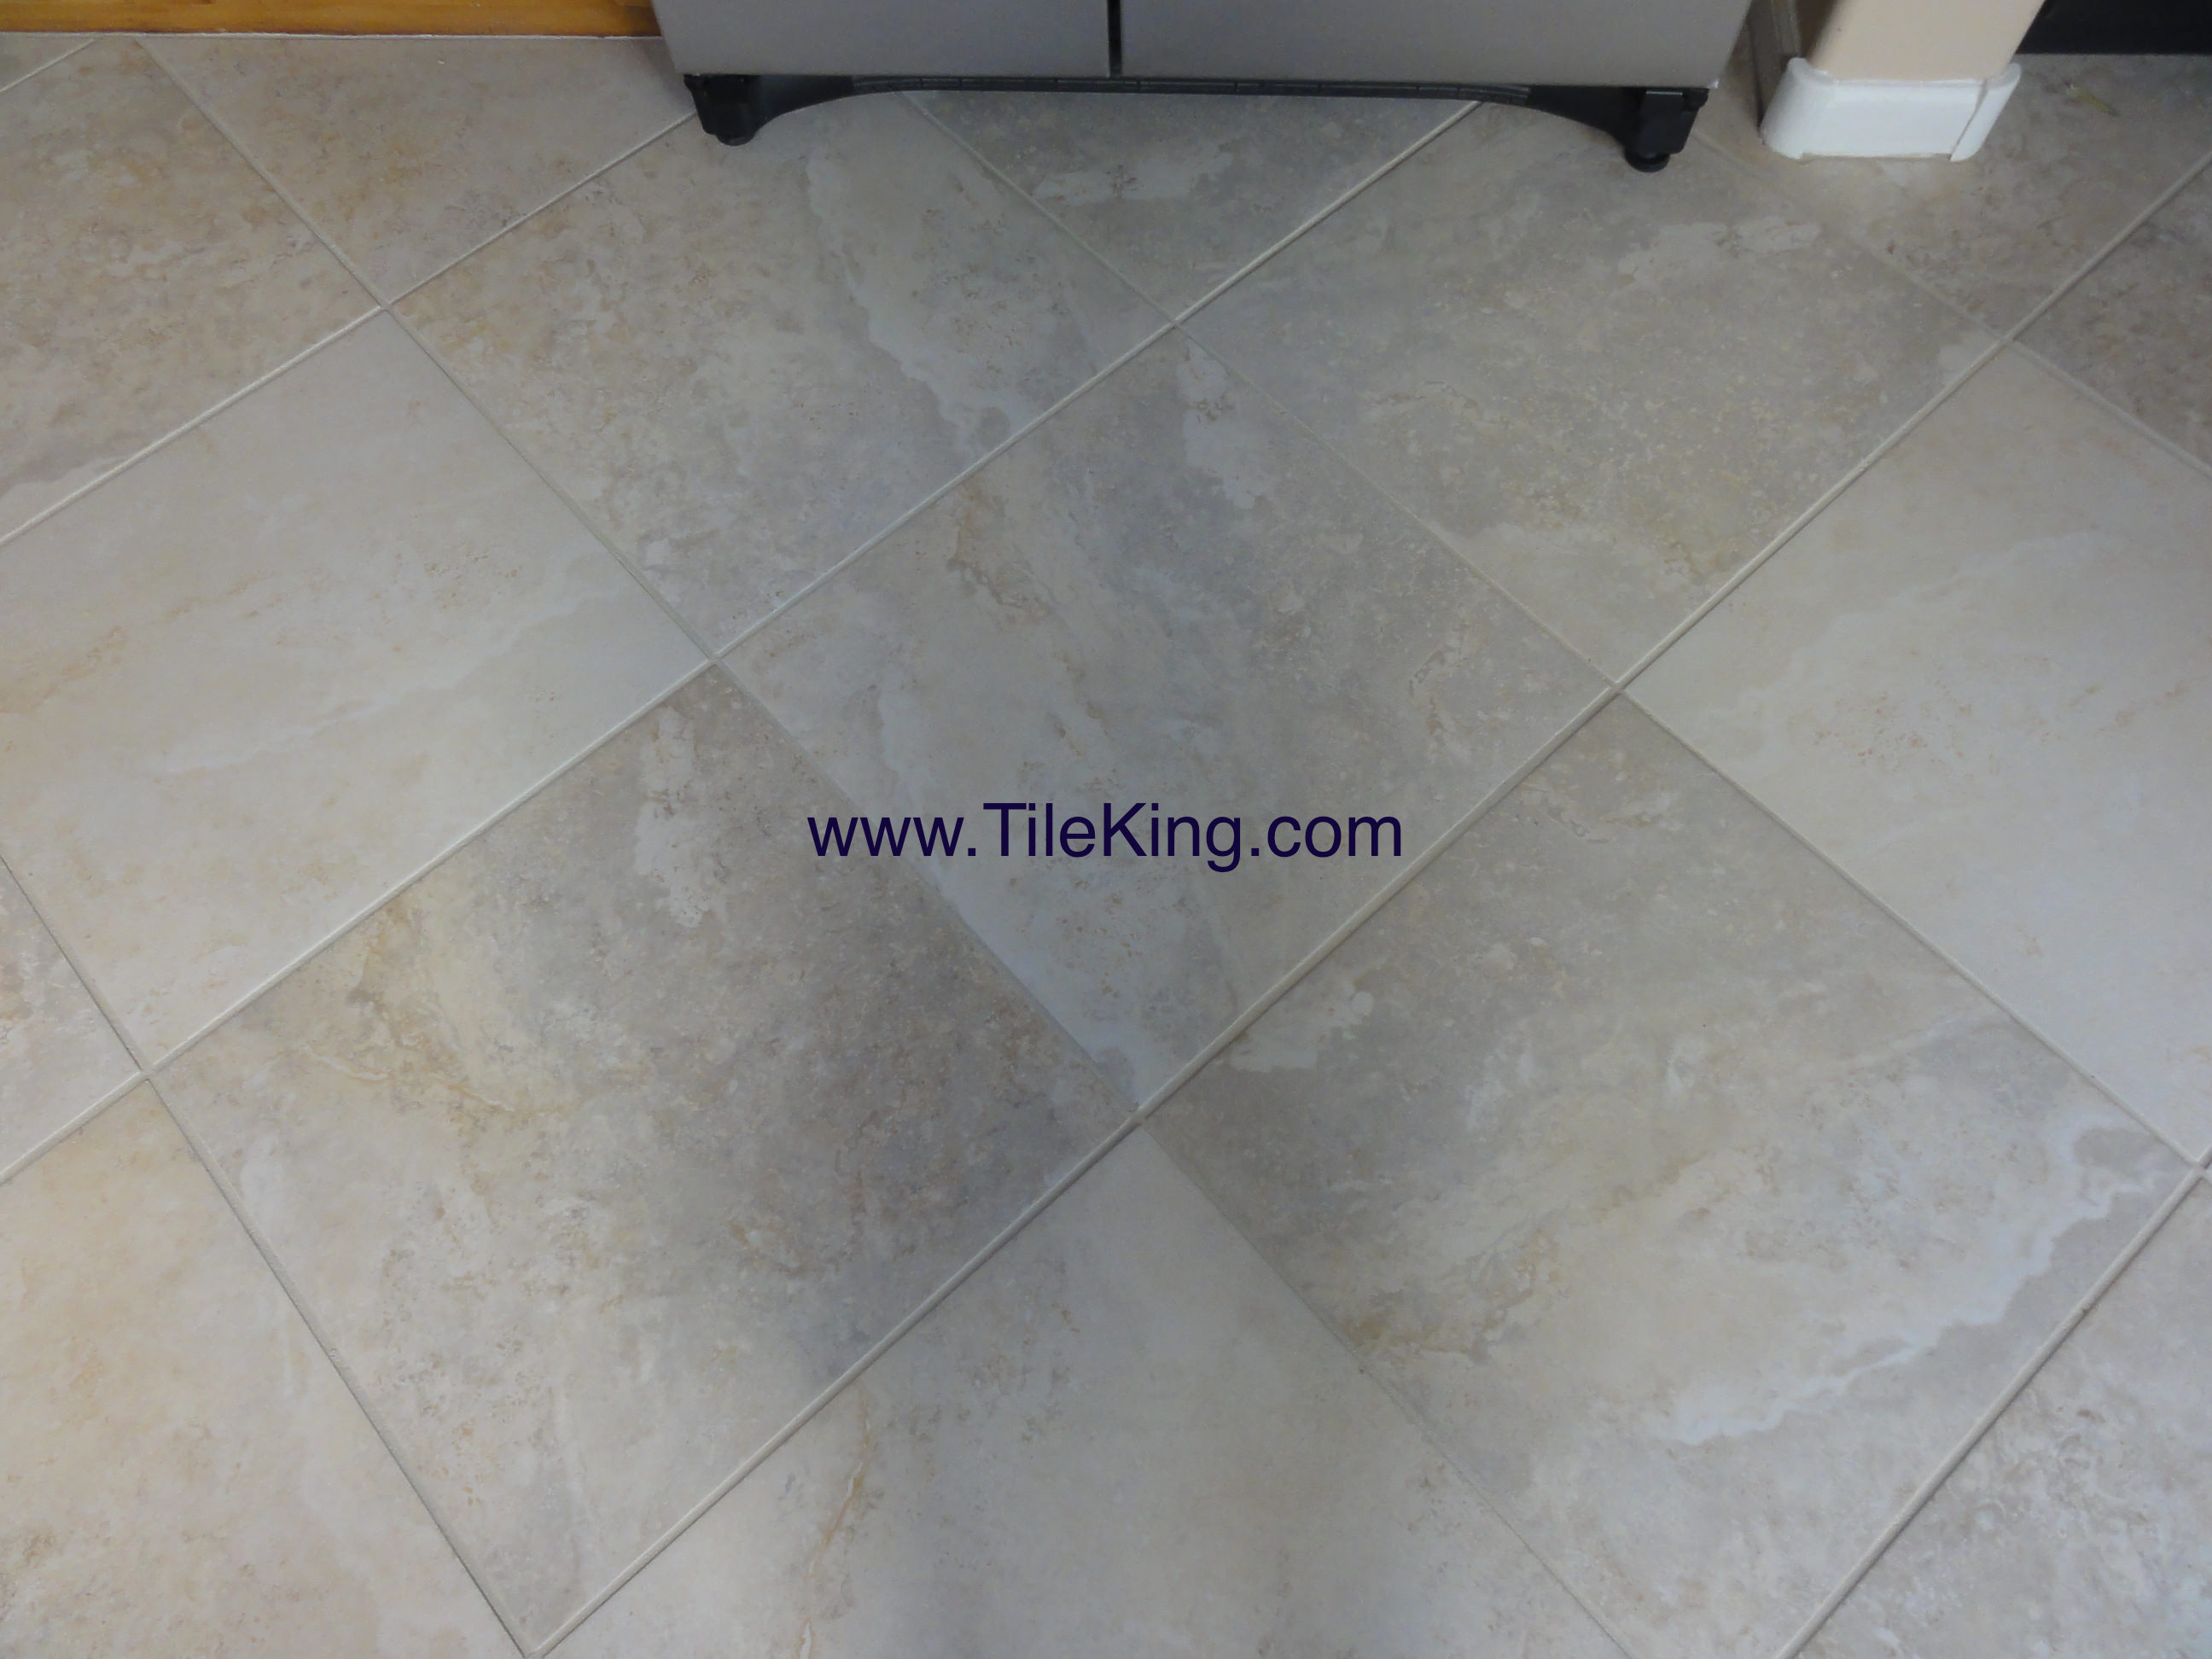 travertine tile after cleaning and sealing